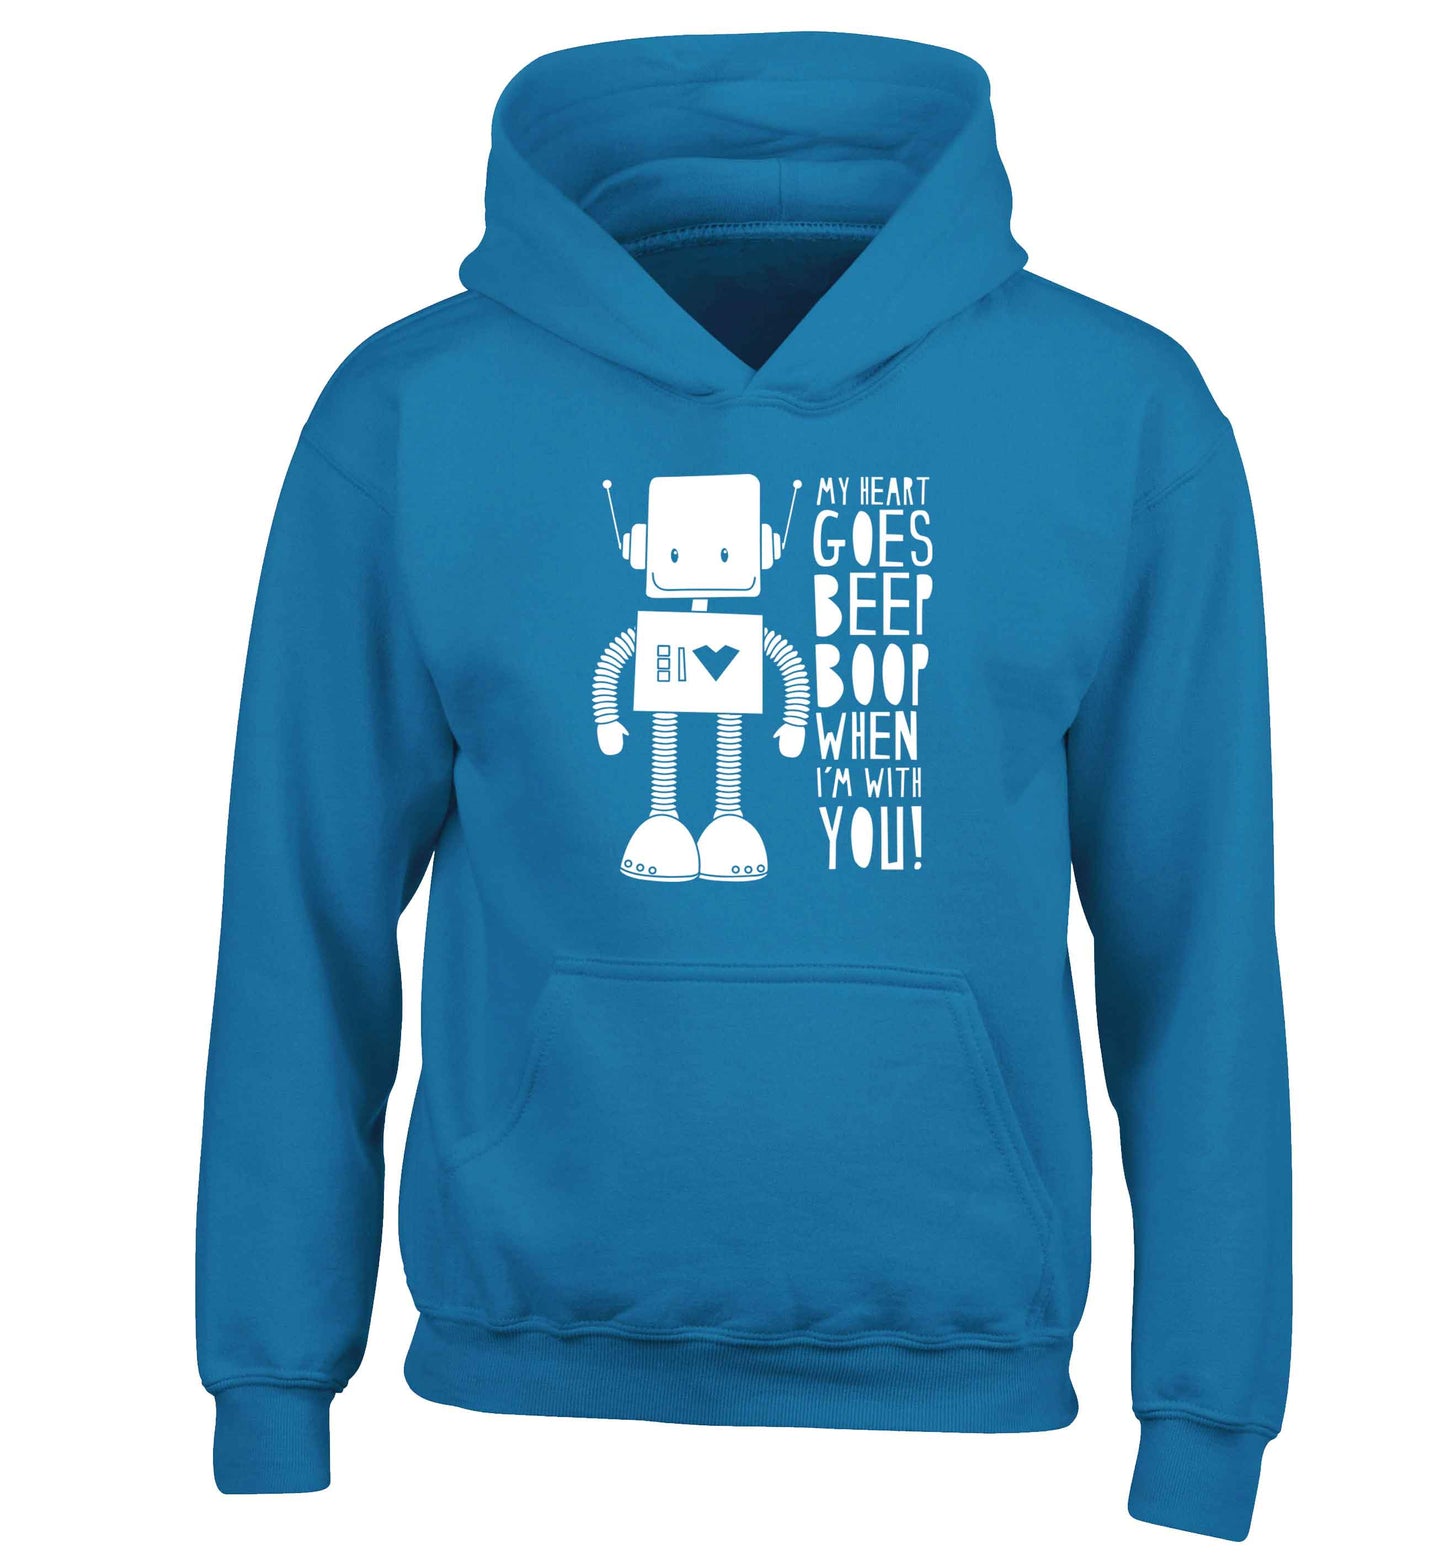 My heart goes beep boop when I'm with you children's blue hoodie 12-13 Years